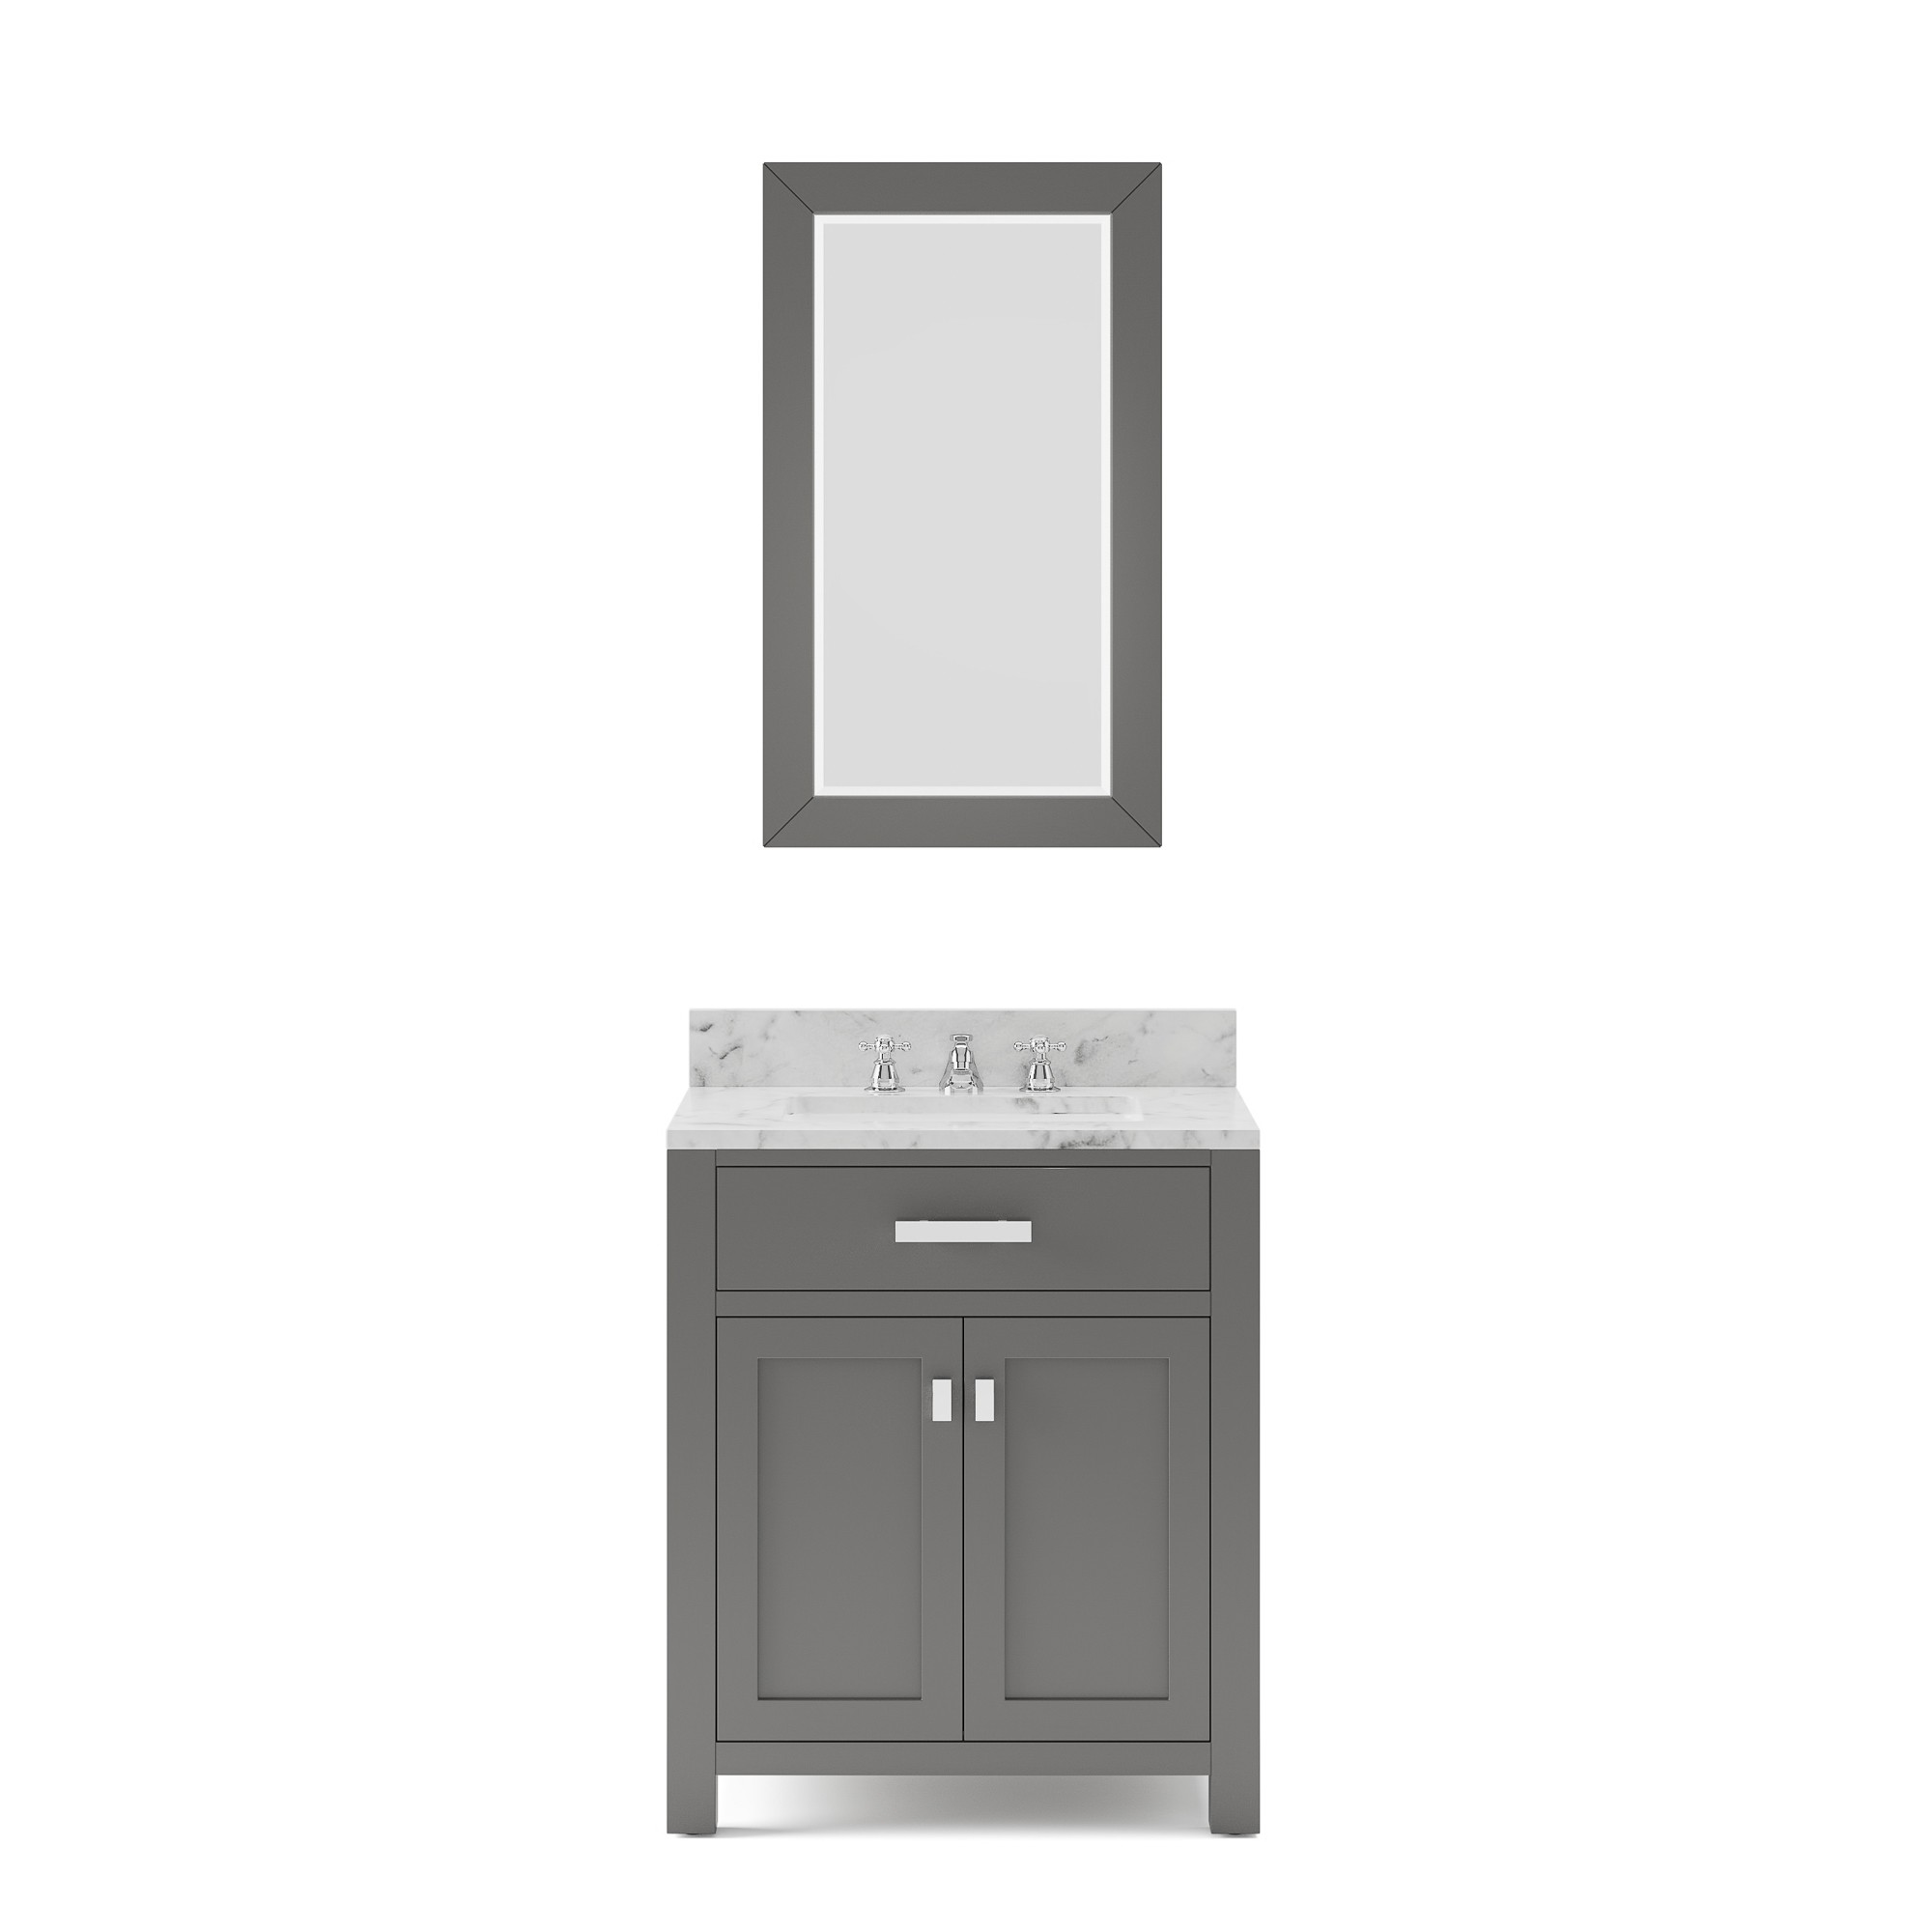 WATER-CREATION MS30CW01CG-R24BX0901 MADISON 30 INCH CASHMERE GREY SINGLE SINK BATHROOM VANITY WITH MATCHING FRAMED MIRROR AND FAUCET